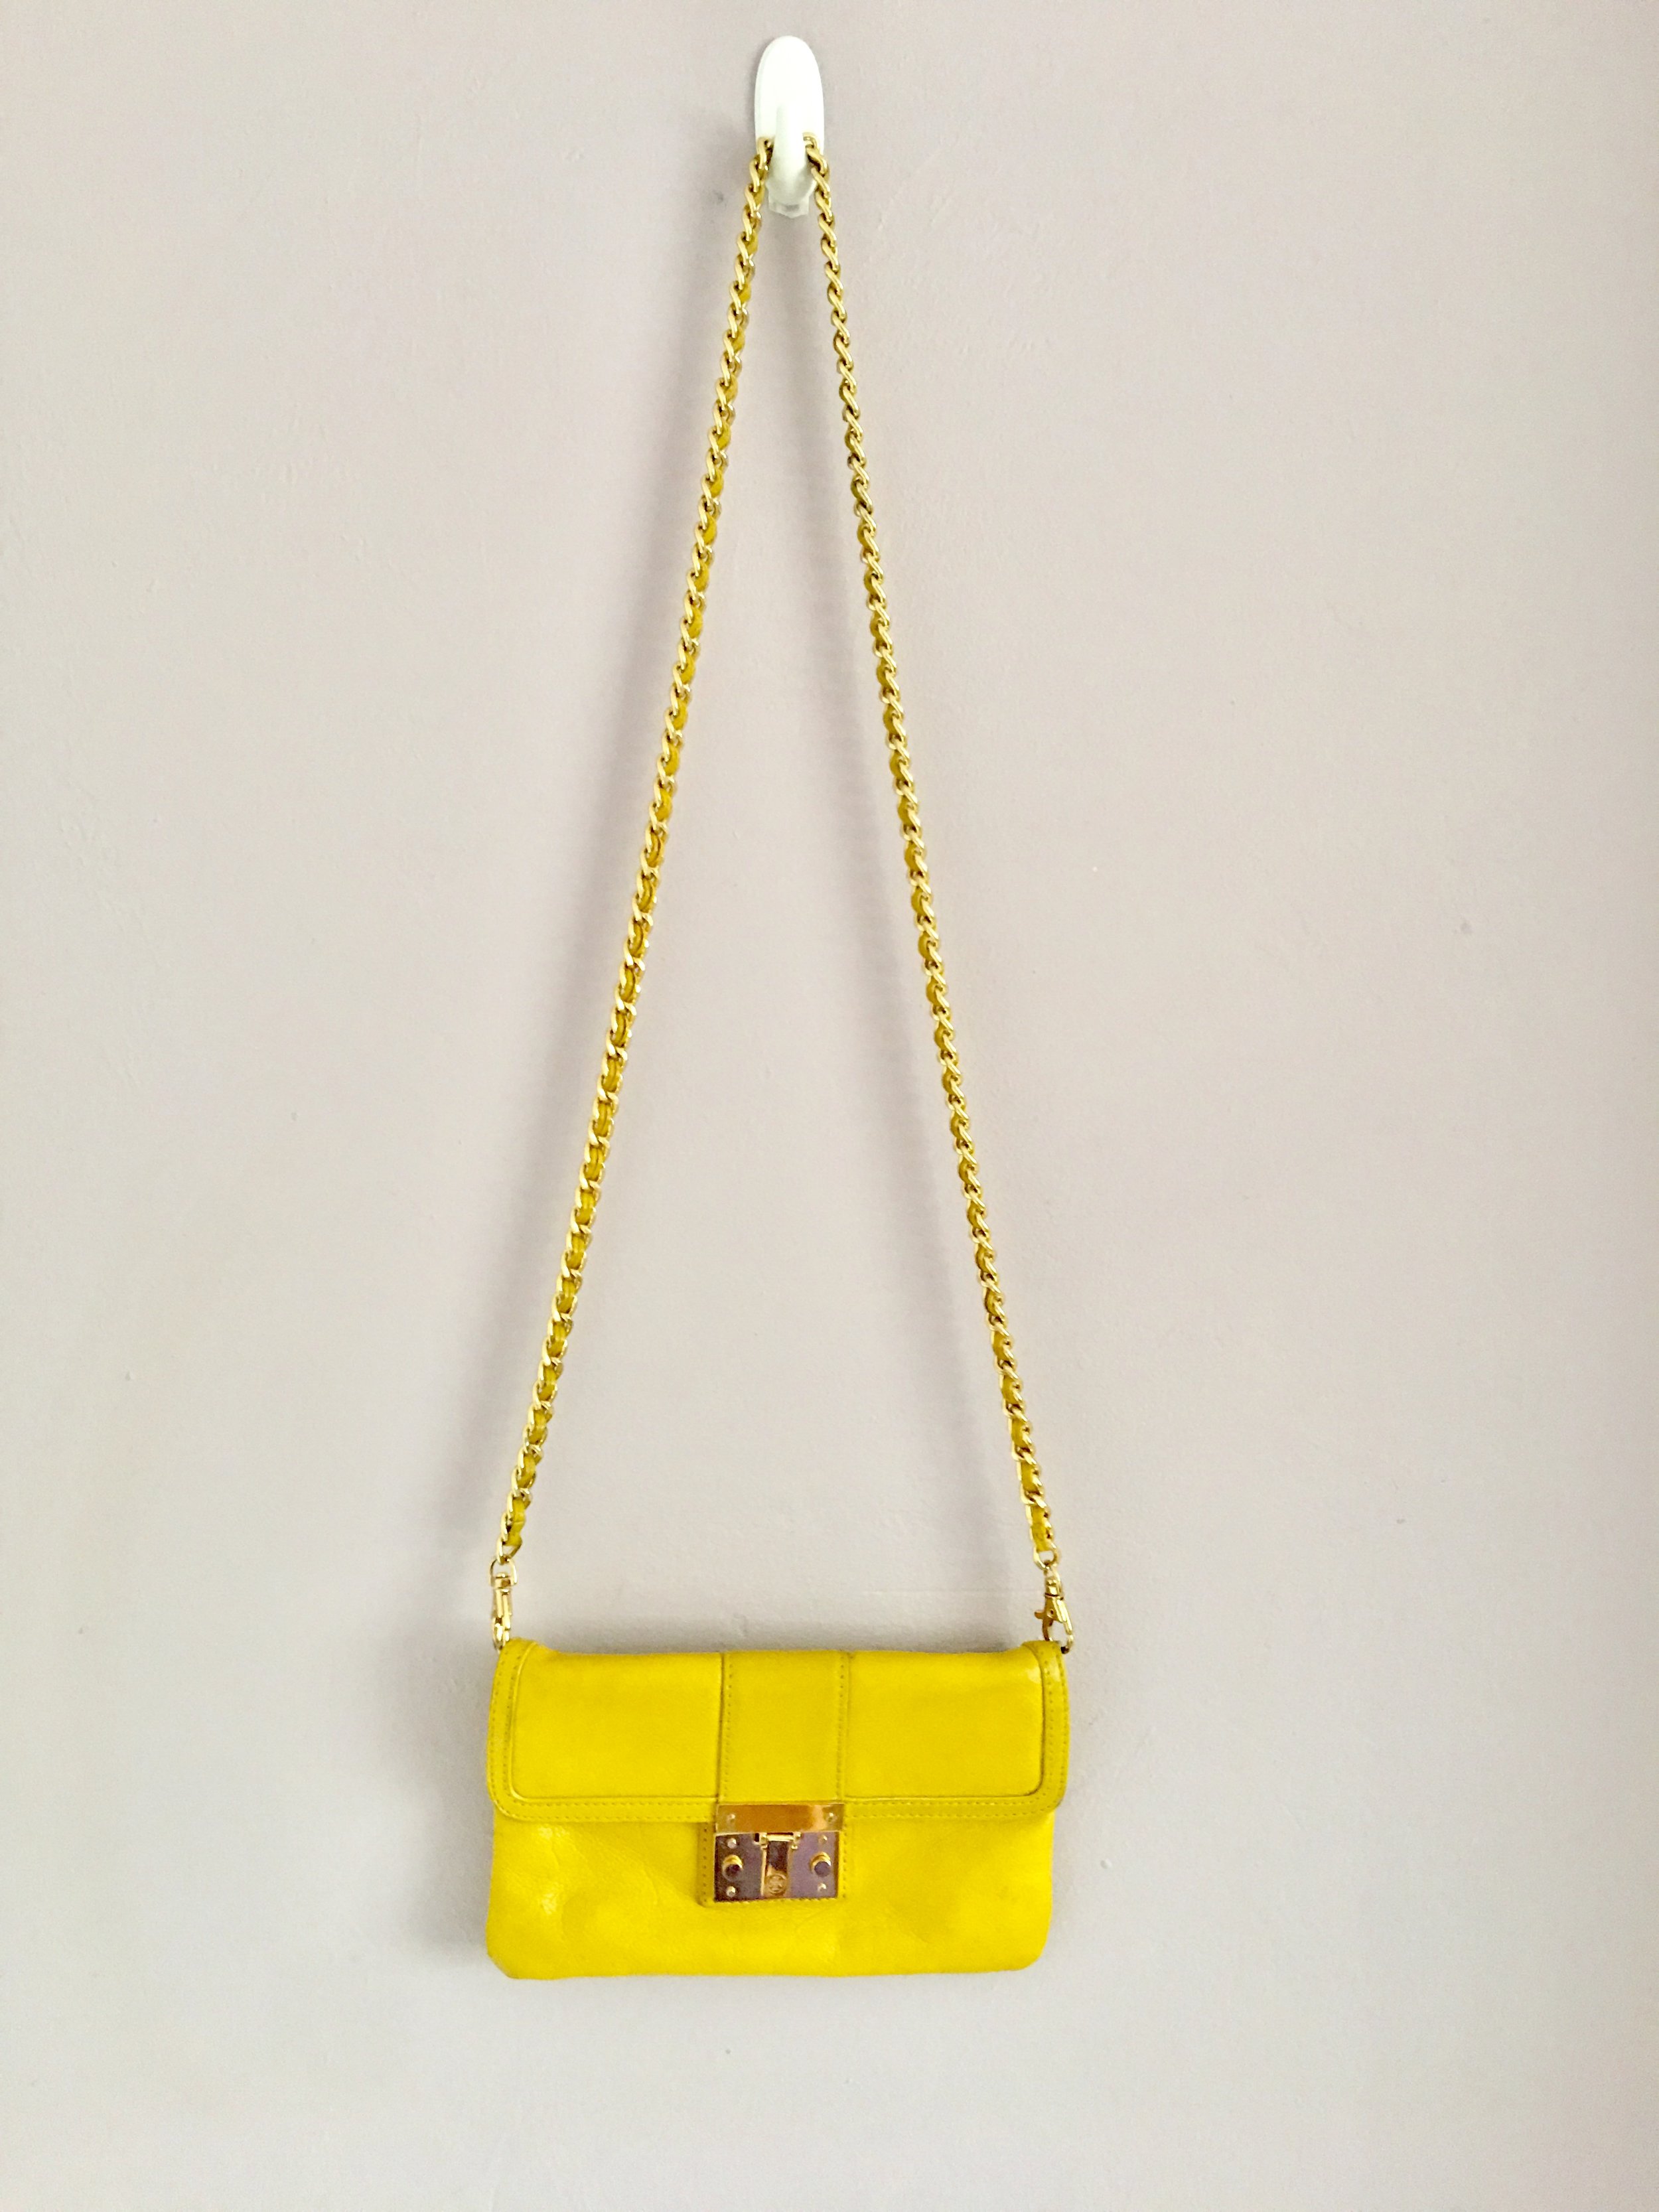 Tory Burch Crossbody Small Yellow Leather Bag with Chain — FLAMINGO SEAFOOD